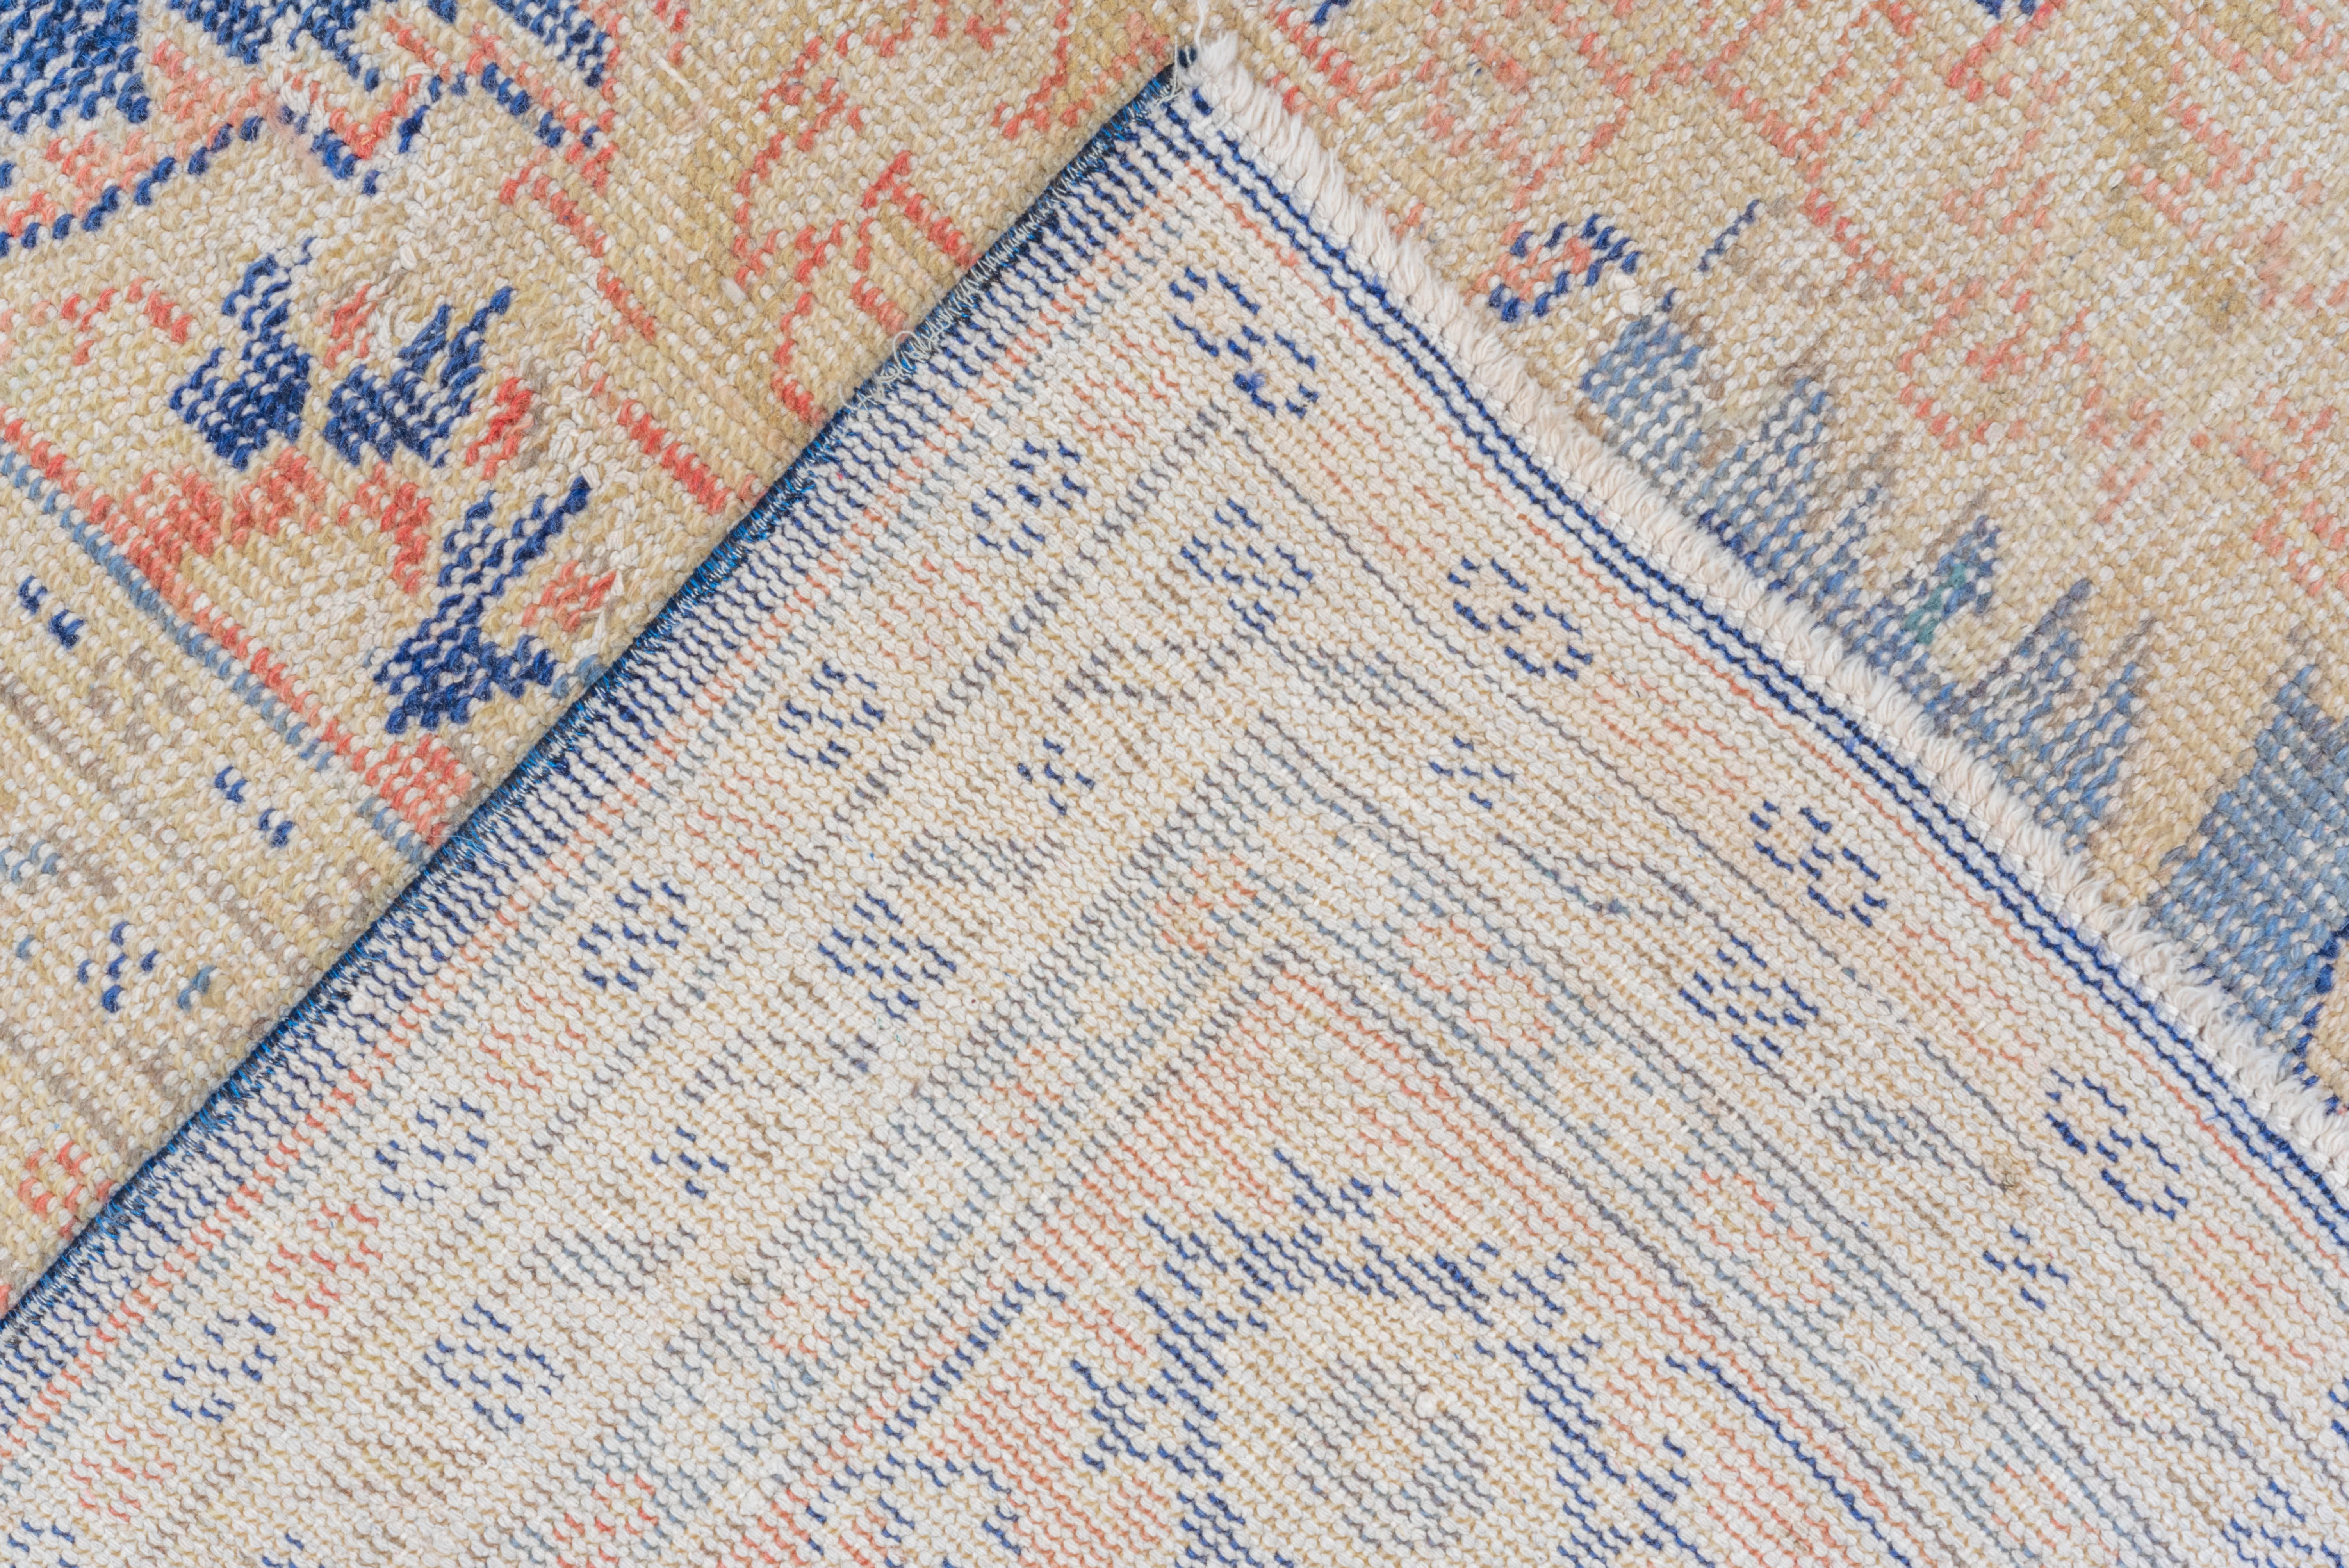 This beautiful Oushak carpet stands the test of time for its long-lasting beauty and quality. The colors on this pre-loved antique remain vibrant, still. This carpet is a one-of-a-kind piece made over a century ago in Turkey and is patiently